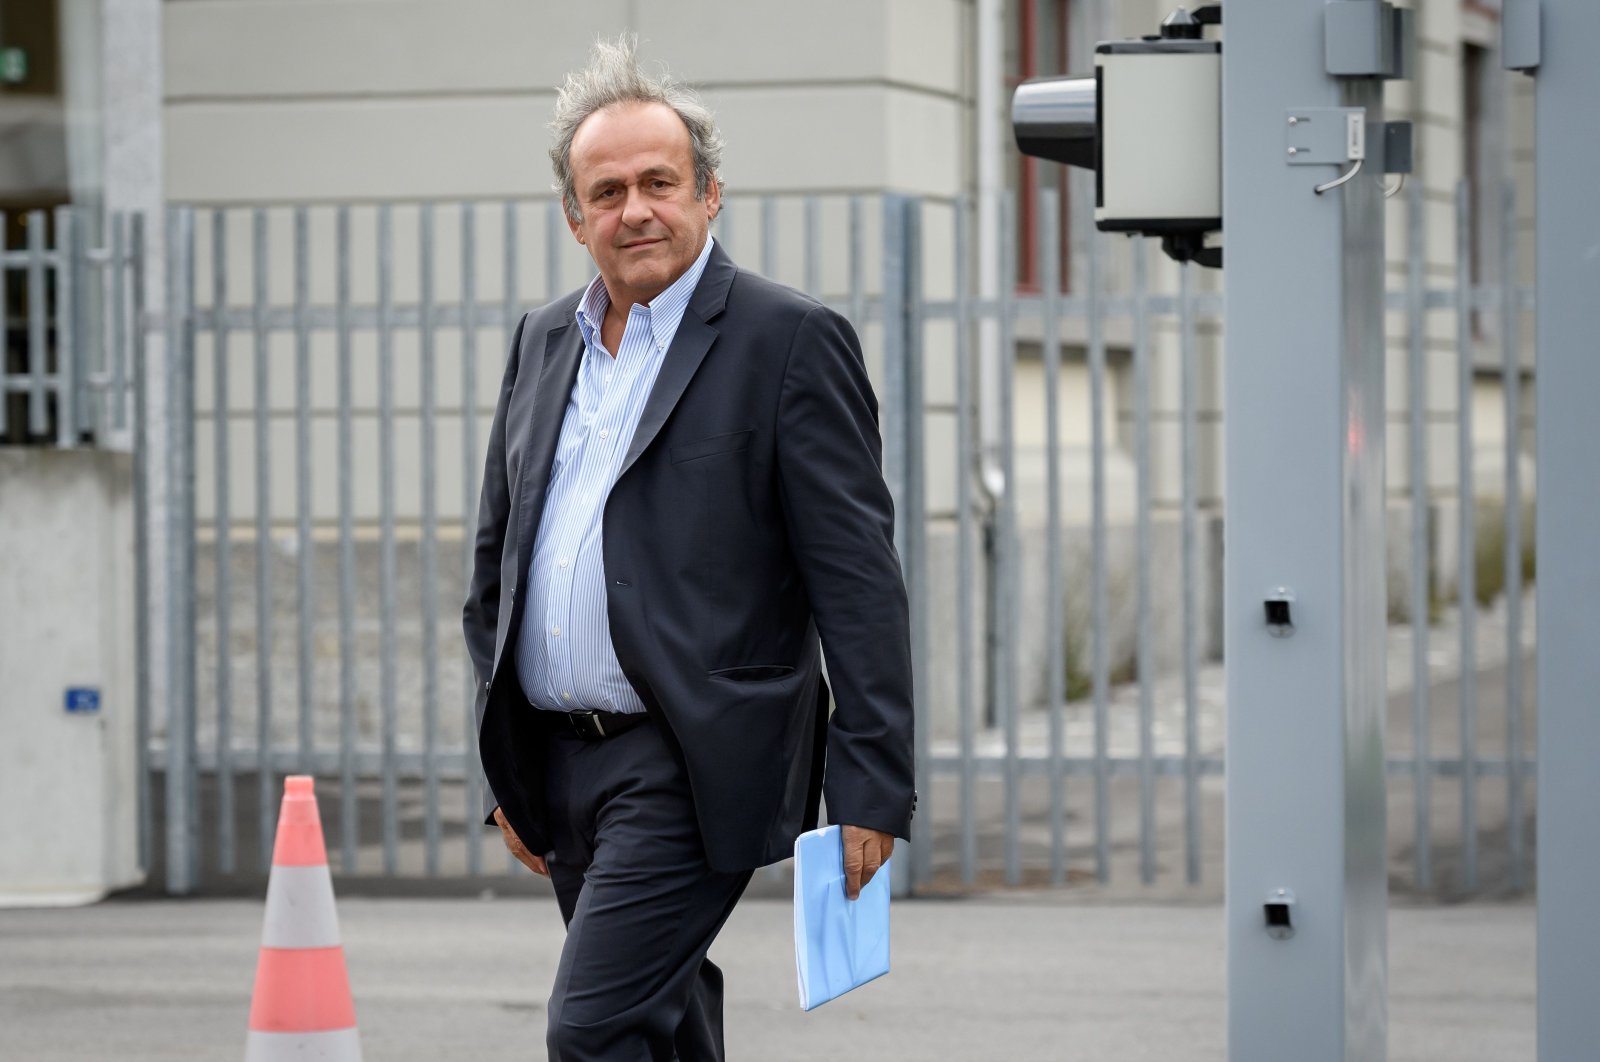 Former UEFA President Michel Platini arrives at the building of the Office of the Attorney General of Switzerland for a hearing, Bern, Switzerland, Aug. 31, 2020. (AFP Photo)